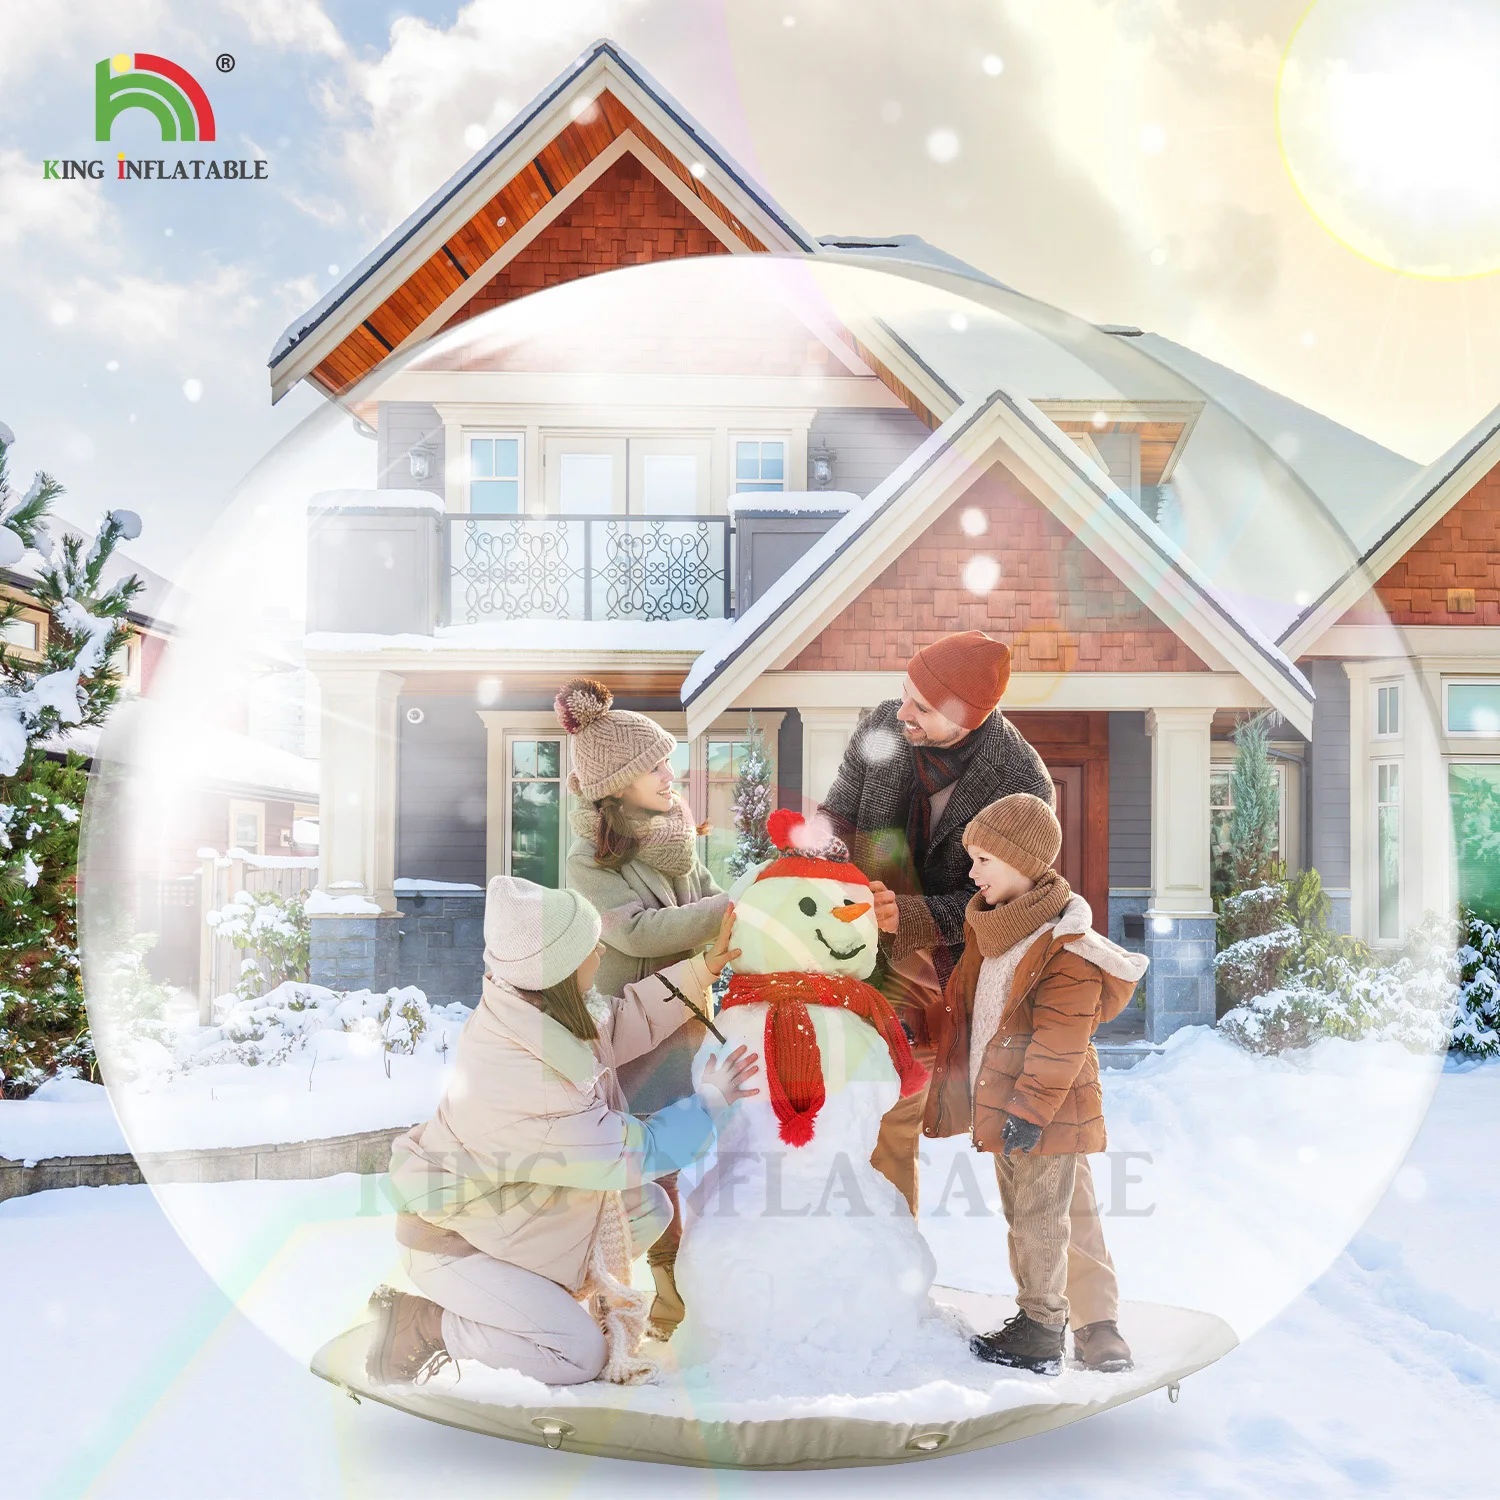 10ft/3m PVC Transparent Bubble Tent Giant Inflatable Snowball Christmas Snow Globe Dome Xmas Outdoor Decoration With Blower